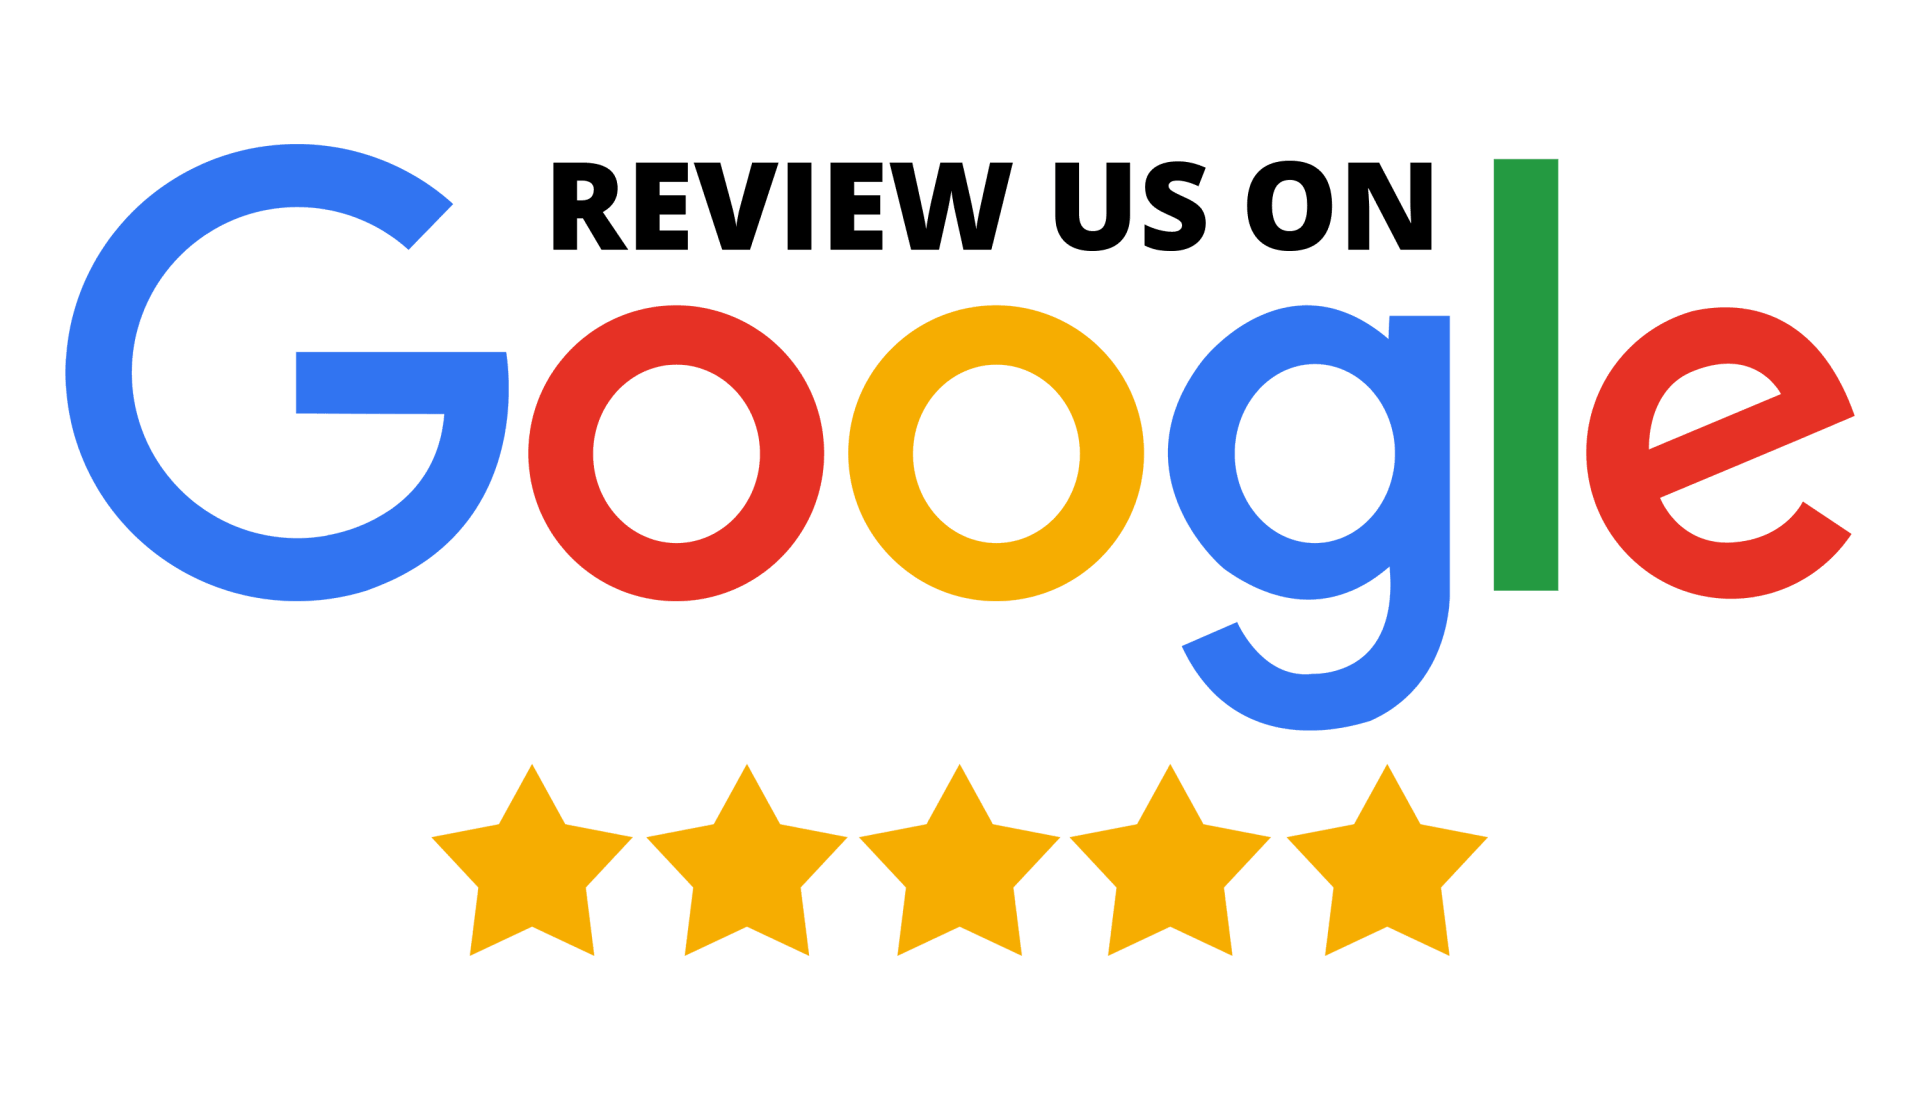 Review us on Google for our Preston Hwy Location